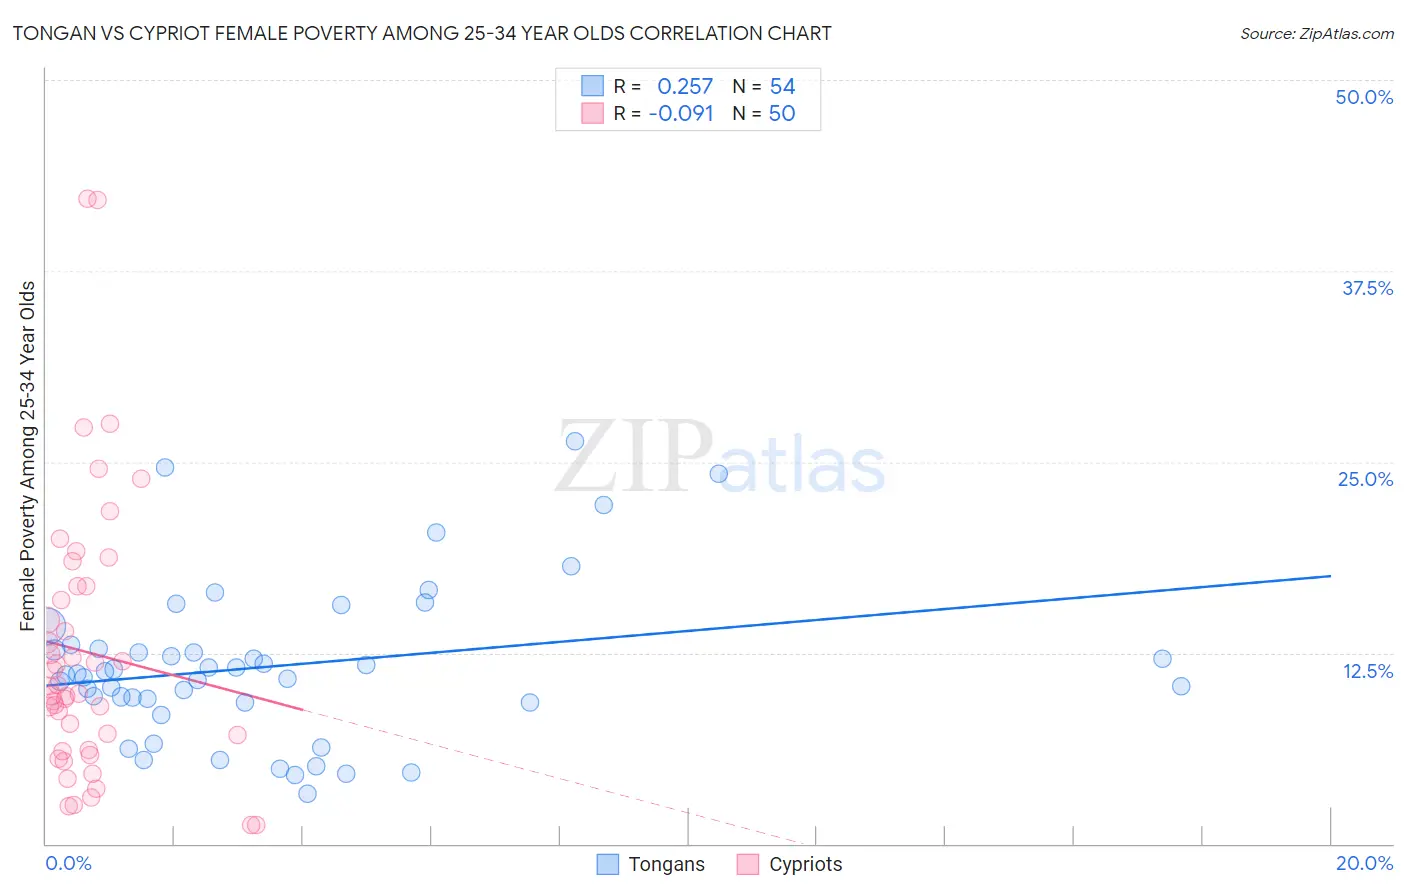 Tongan vs Cypriot Female Poverty Among 25-34 Year Olds